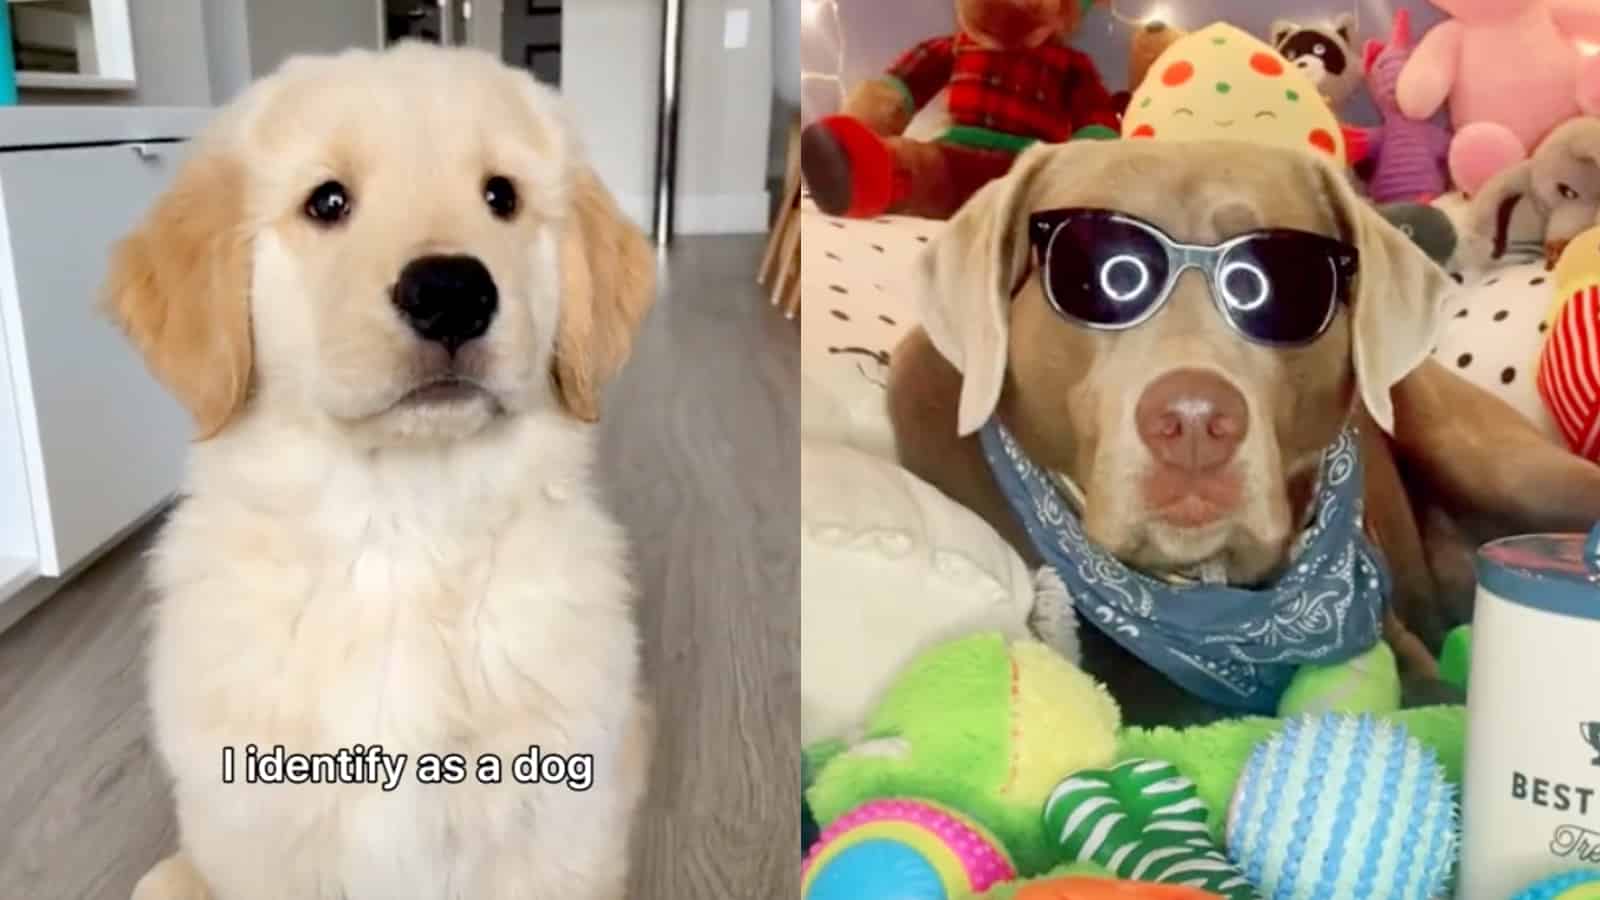 Dogs in a viral TikTok trend